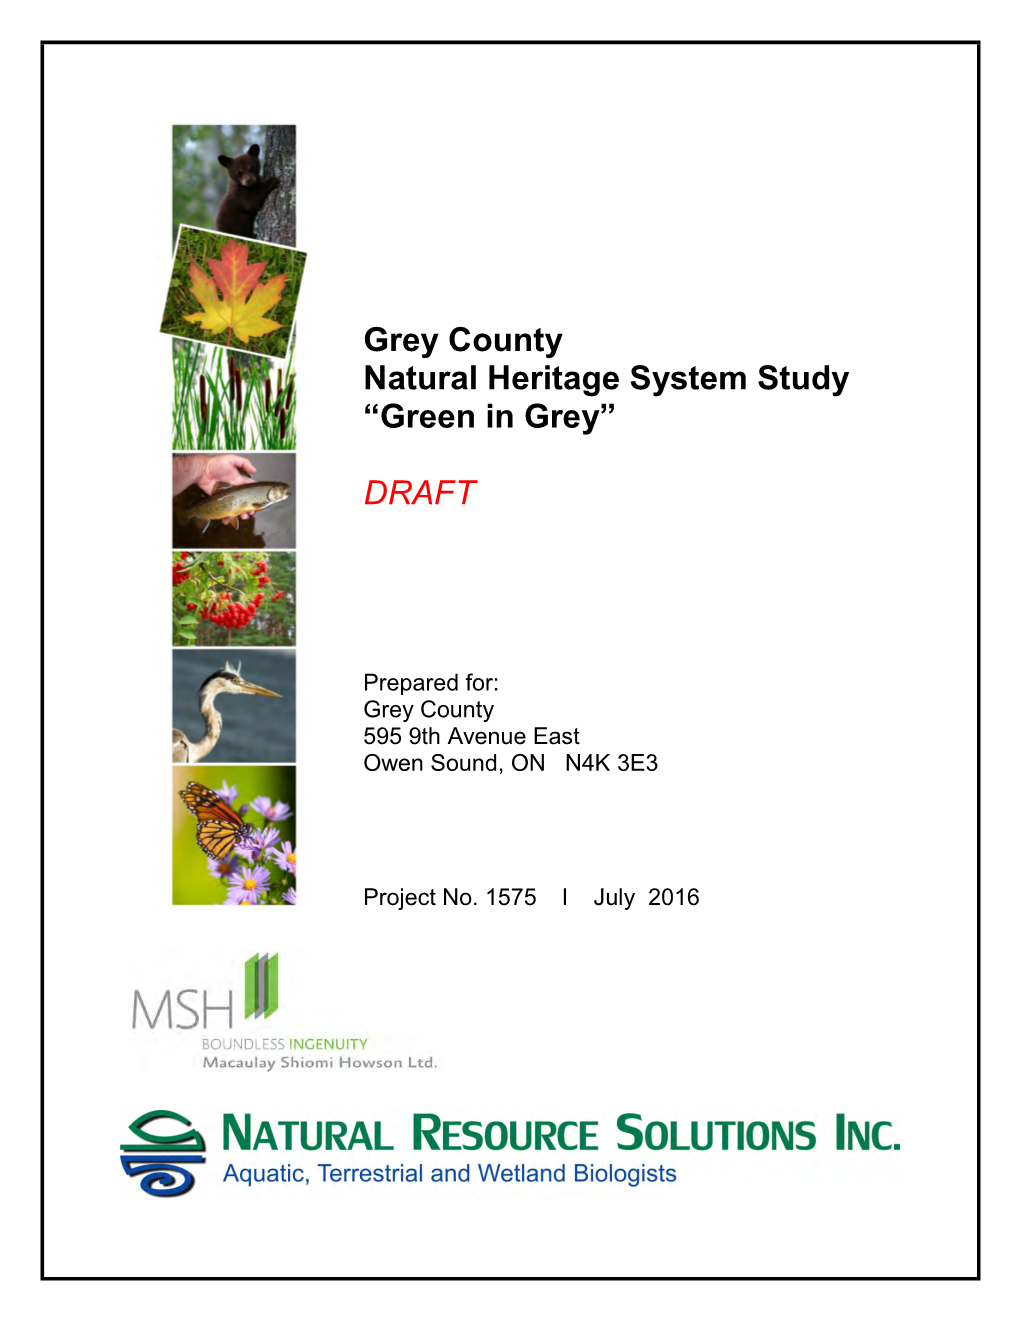 Grey County Natural Heritage System Study “Green in Grey” DRAFT